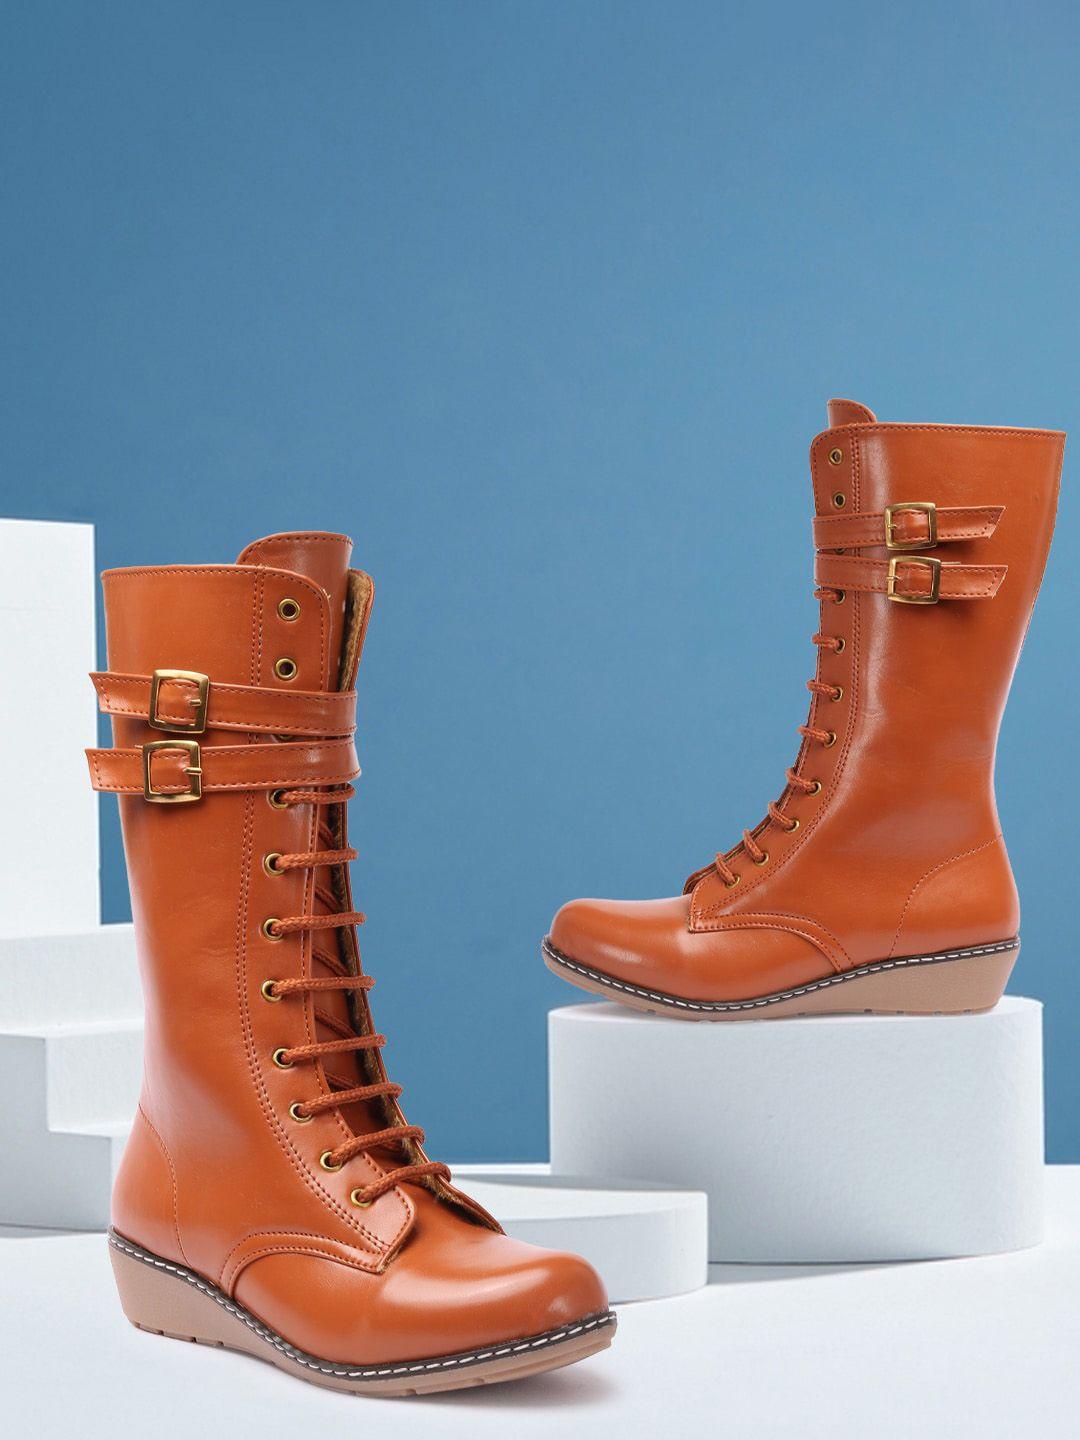 the roadster lifestyle co. women brown high top wedges winter boots with buckle detail